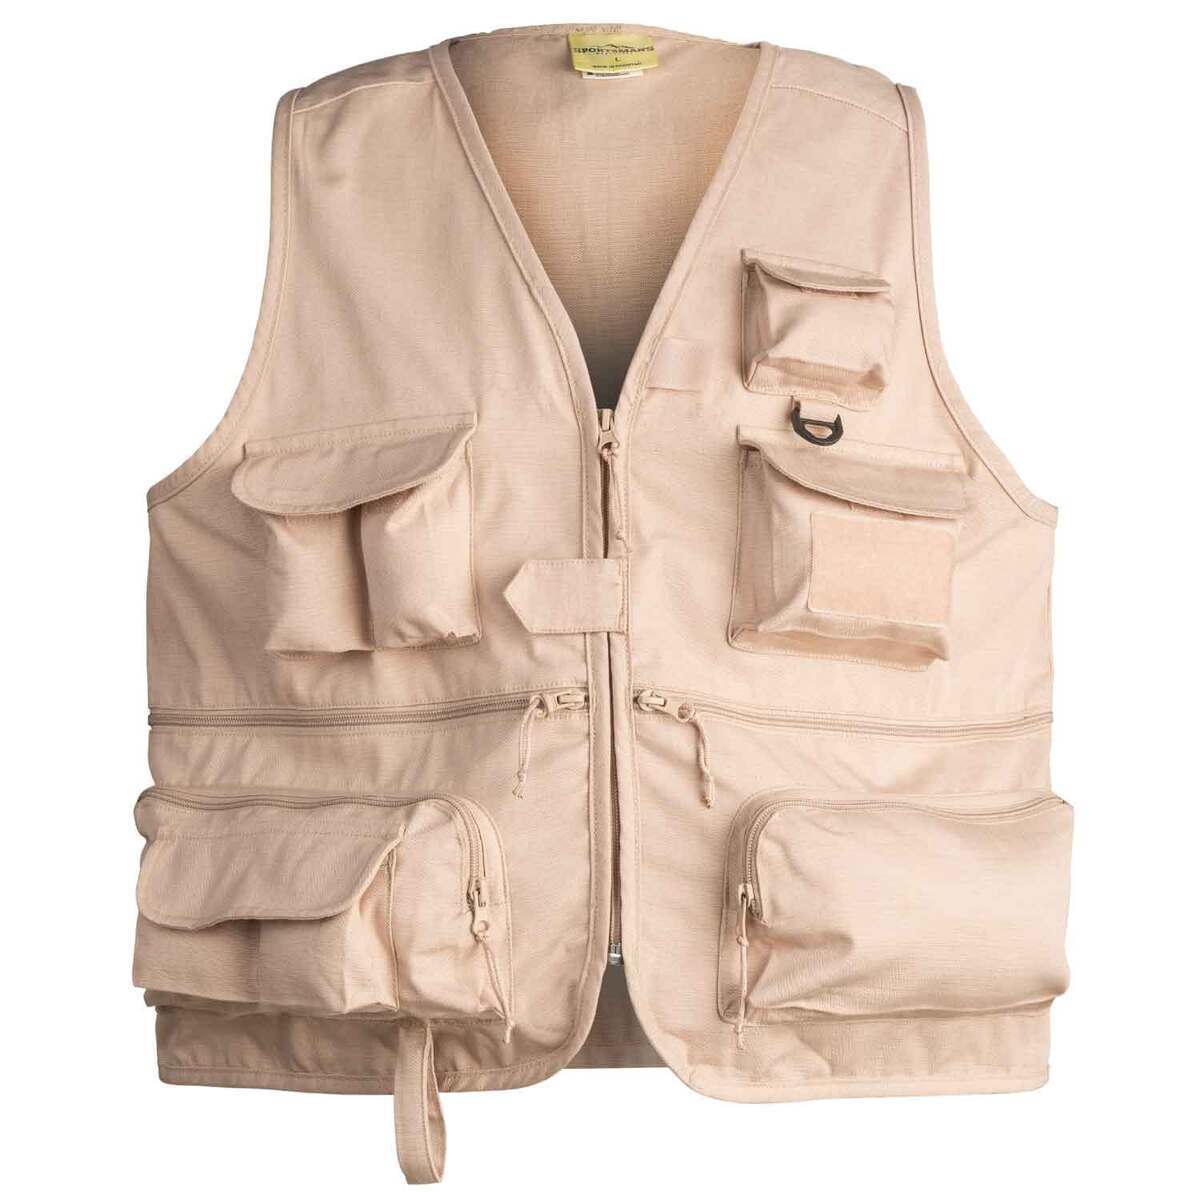 Simms XL Fly Fishing Vest with Supplies - sporting goods - by